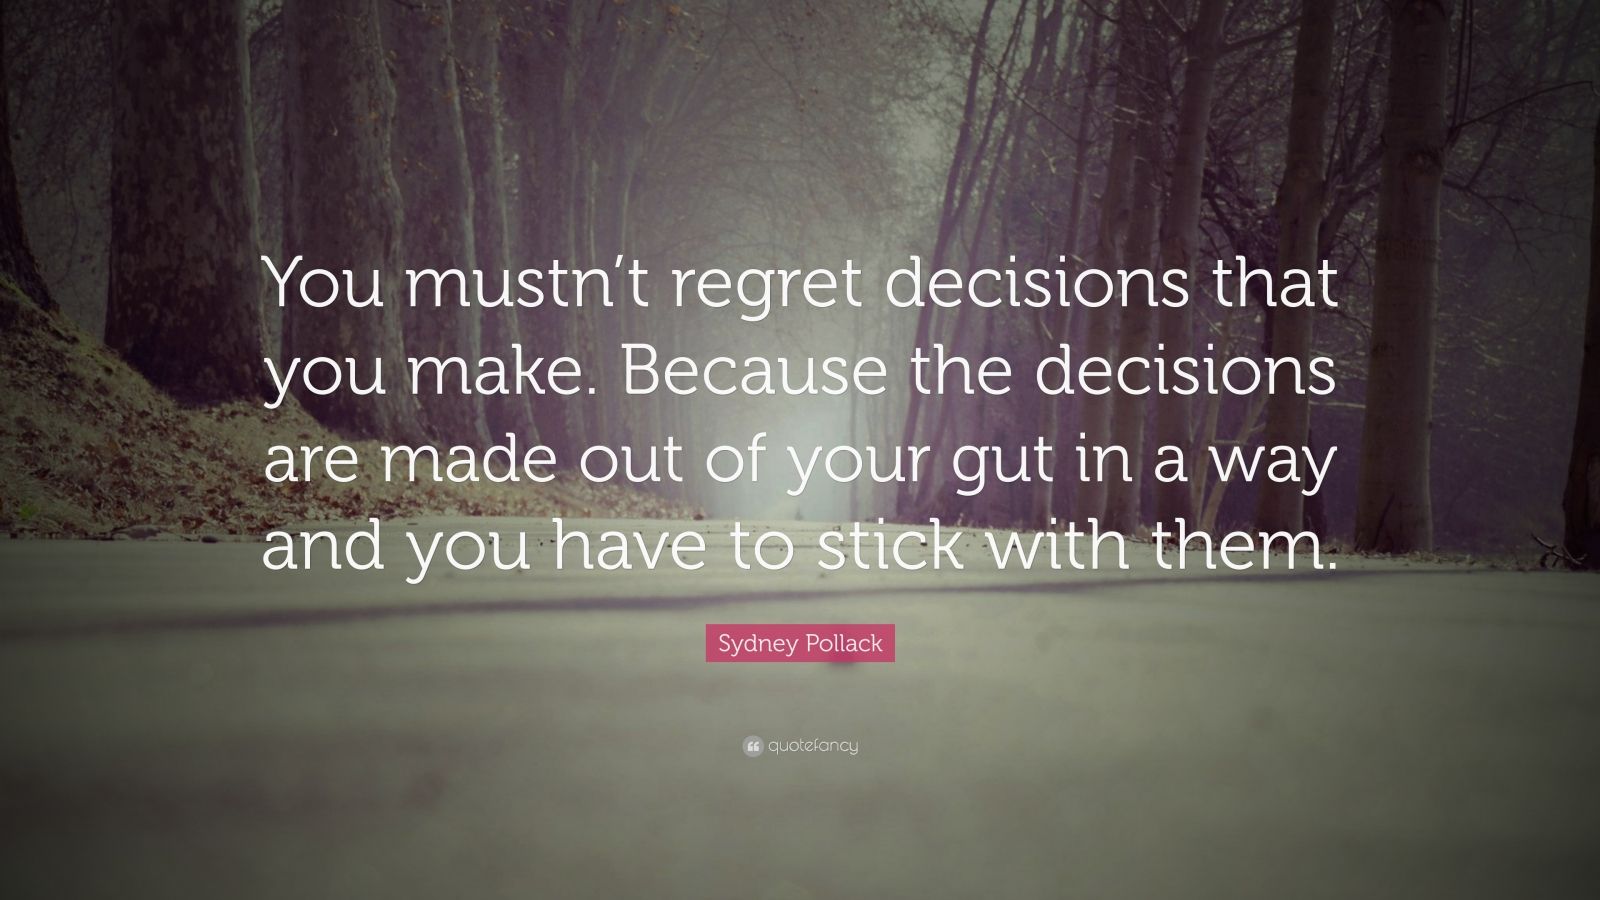 Sydney Pollack Quote “You mustn’t regret decisions that